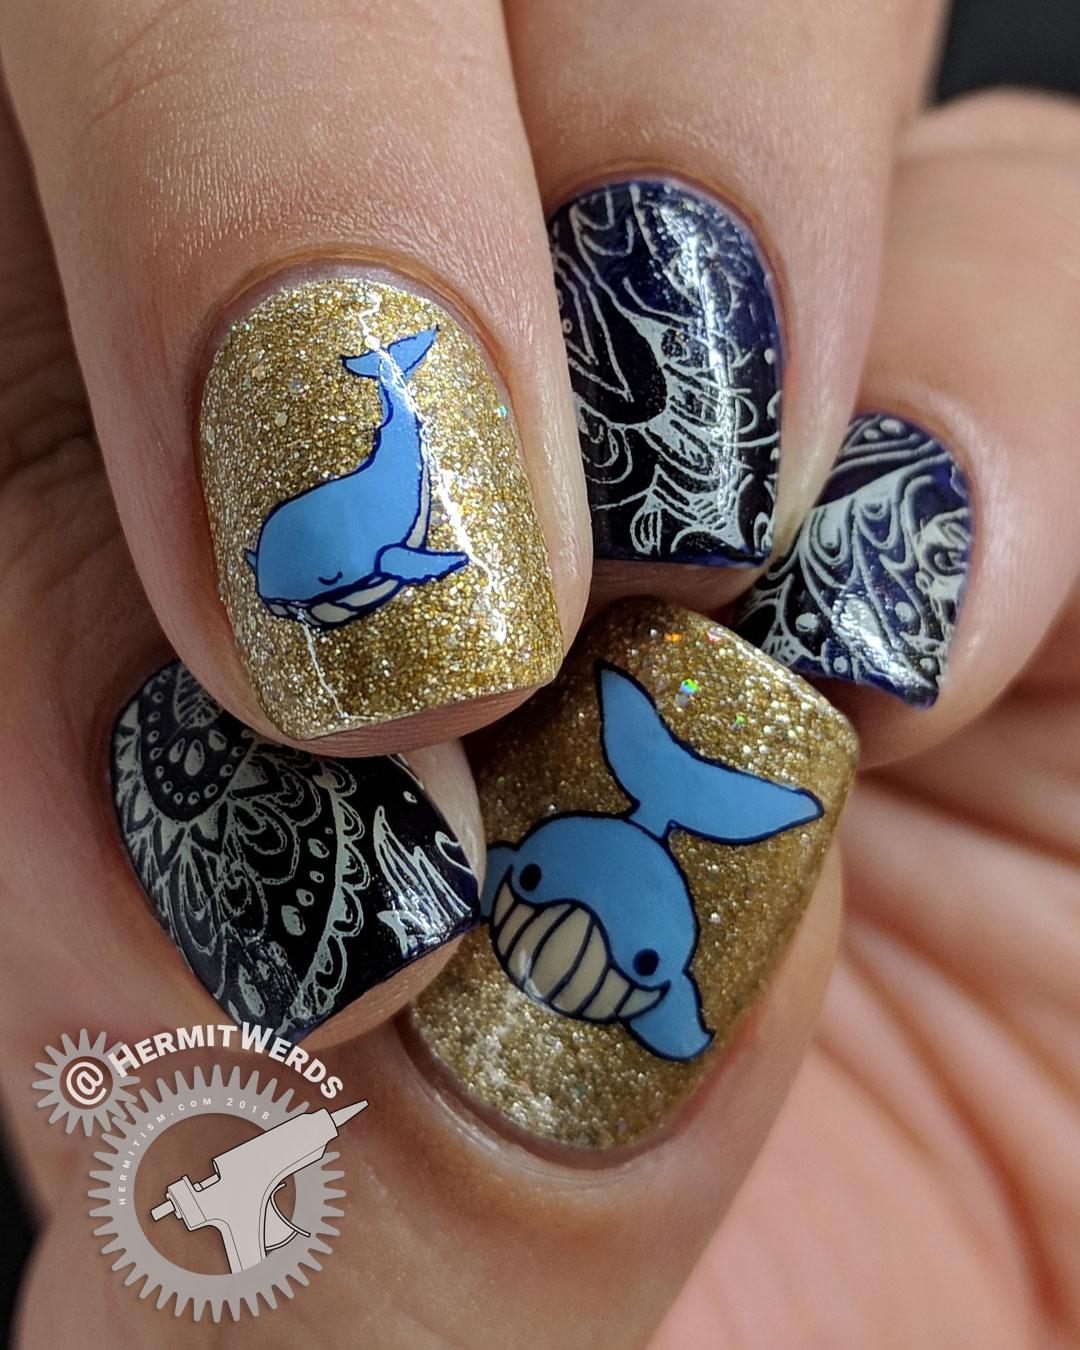 Paisley Whale - Hermit Werds - nail art with a dark blue and cream paisley pattern and two glittery gold whale accent nails